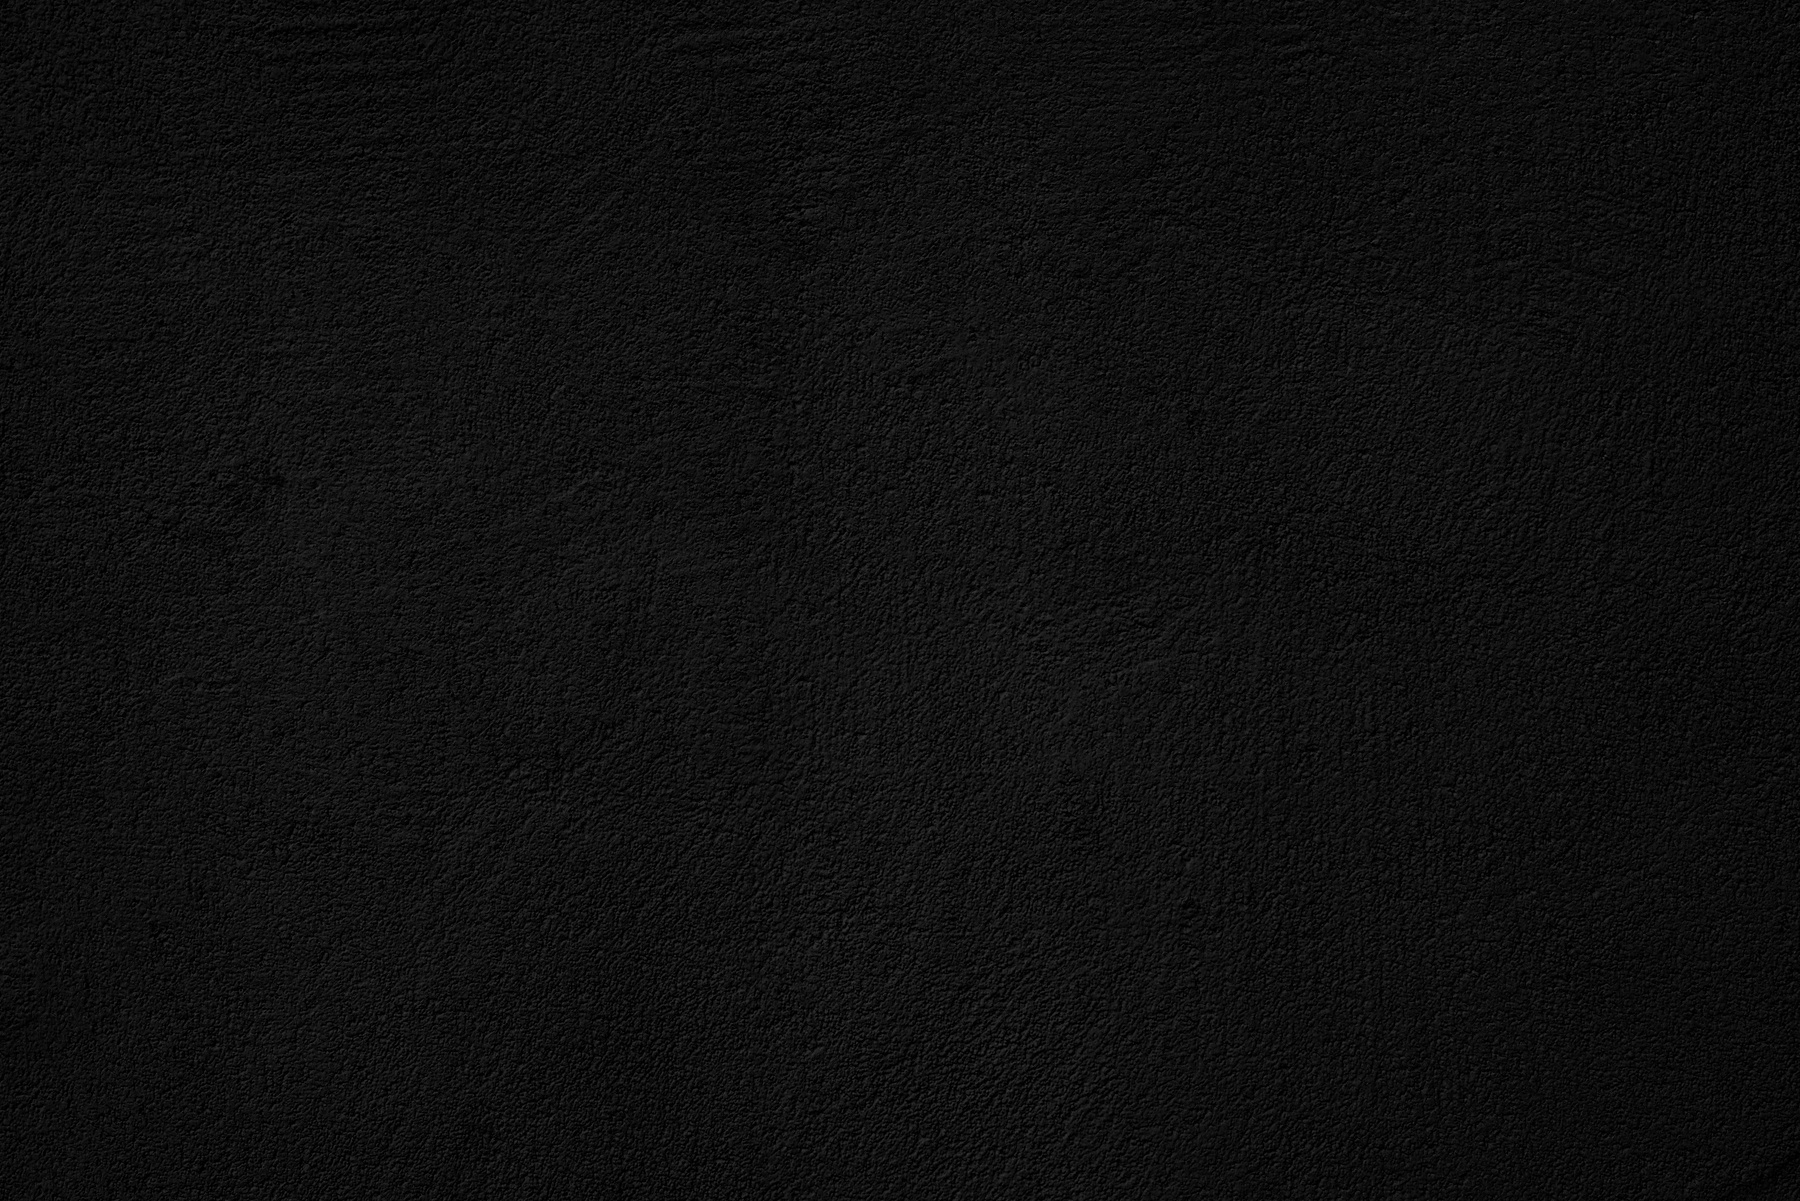 Abstract Black Textured Background